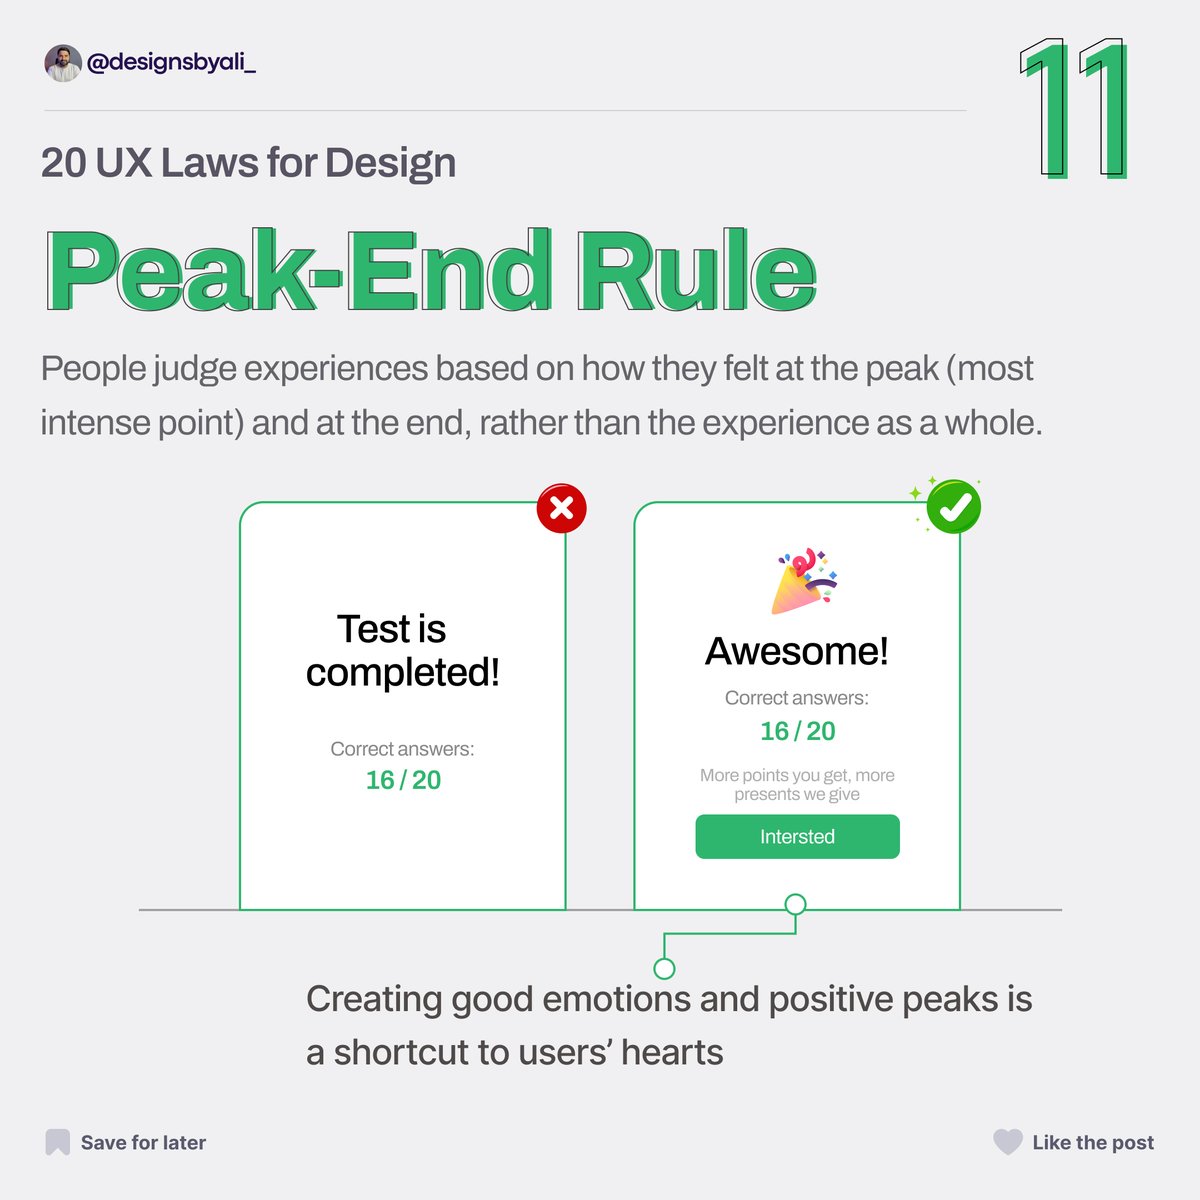 Top UX Laws: Peak-End Rule 🏔️
People judge experiences based on how they felt at the peak (most intense point) and at the end, rather than the experience as a whole.

#PeakEndRule #Experience #Emotions #Memory #Psychology #Perception #designsbyali #uidesigner #uiux #uxlaws